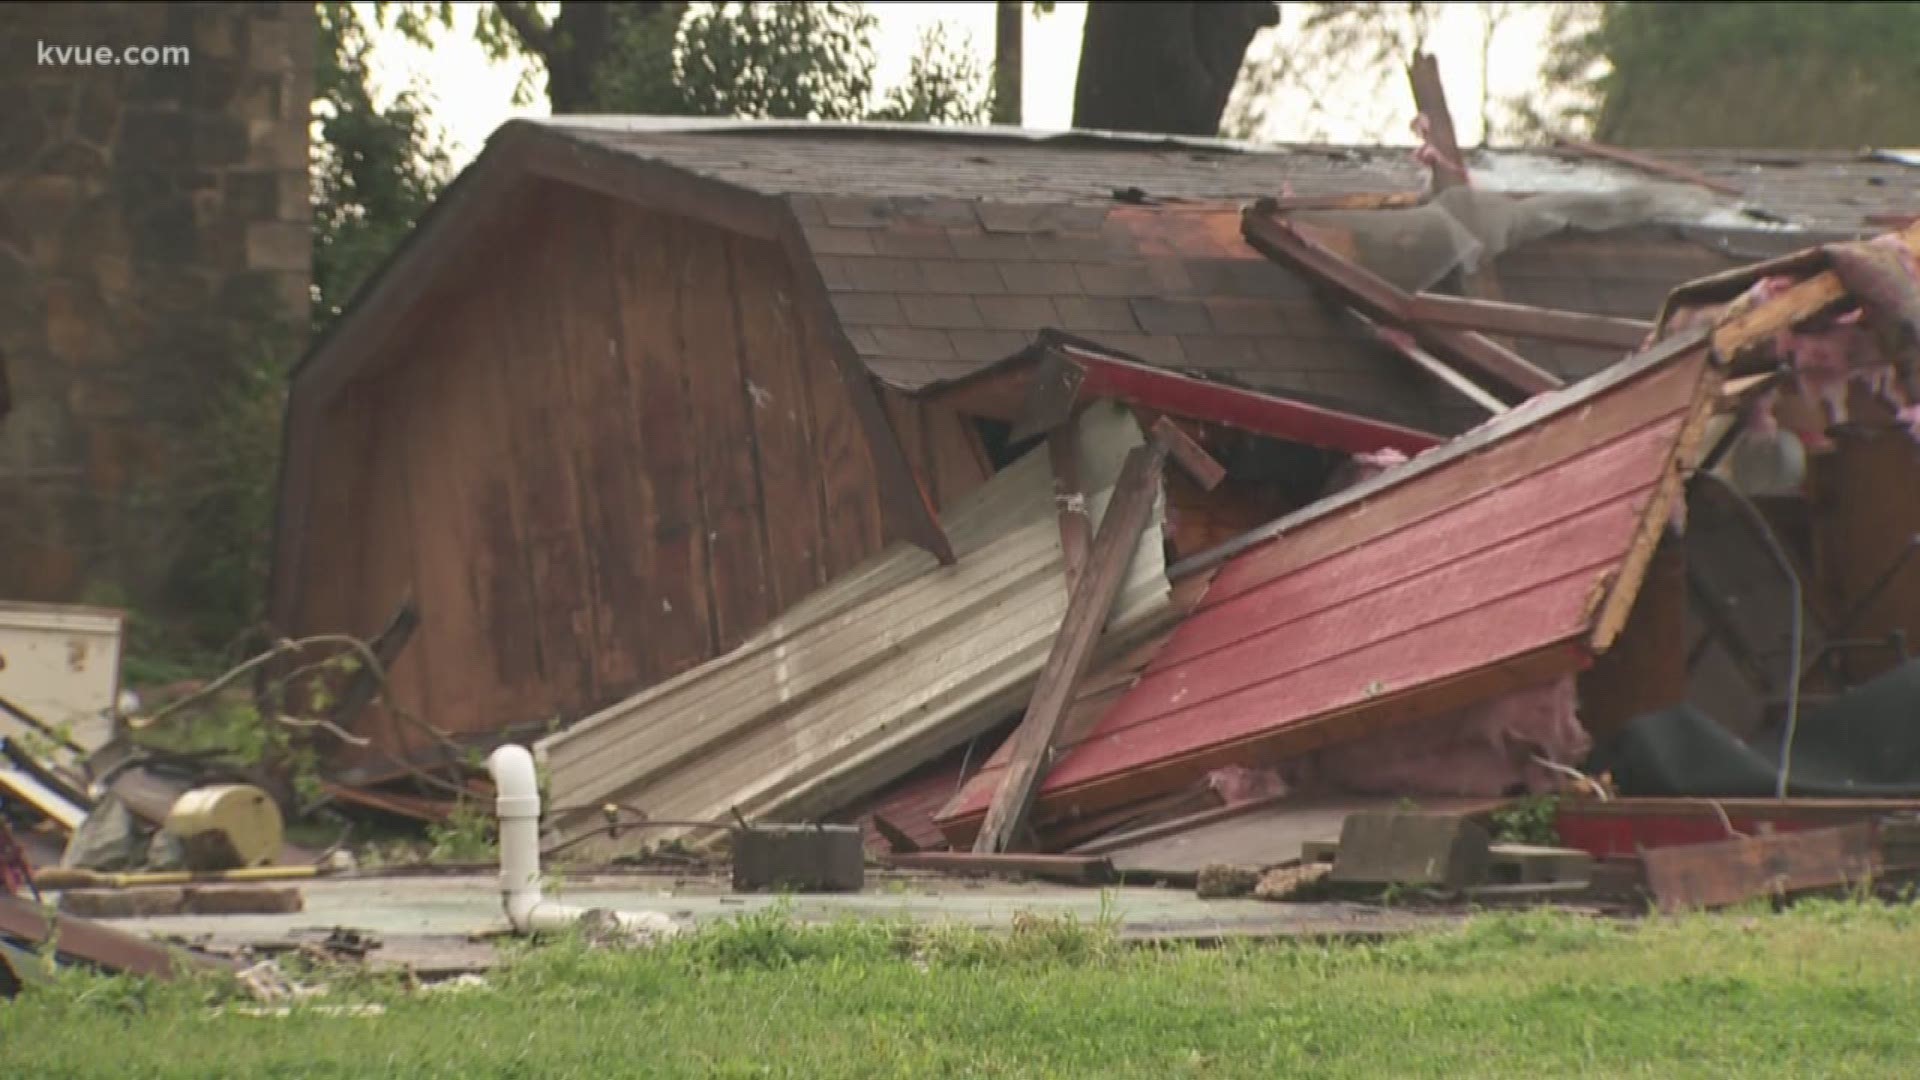 The town is now focused on cleaning up after Saturday's storms.